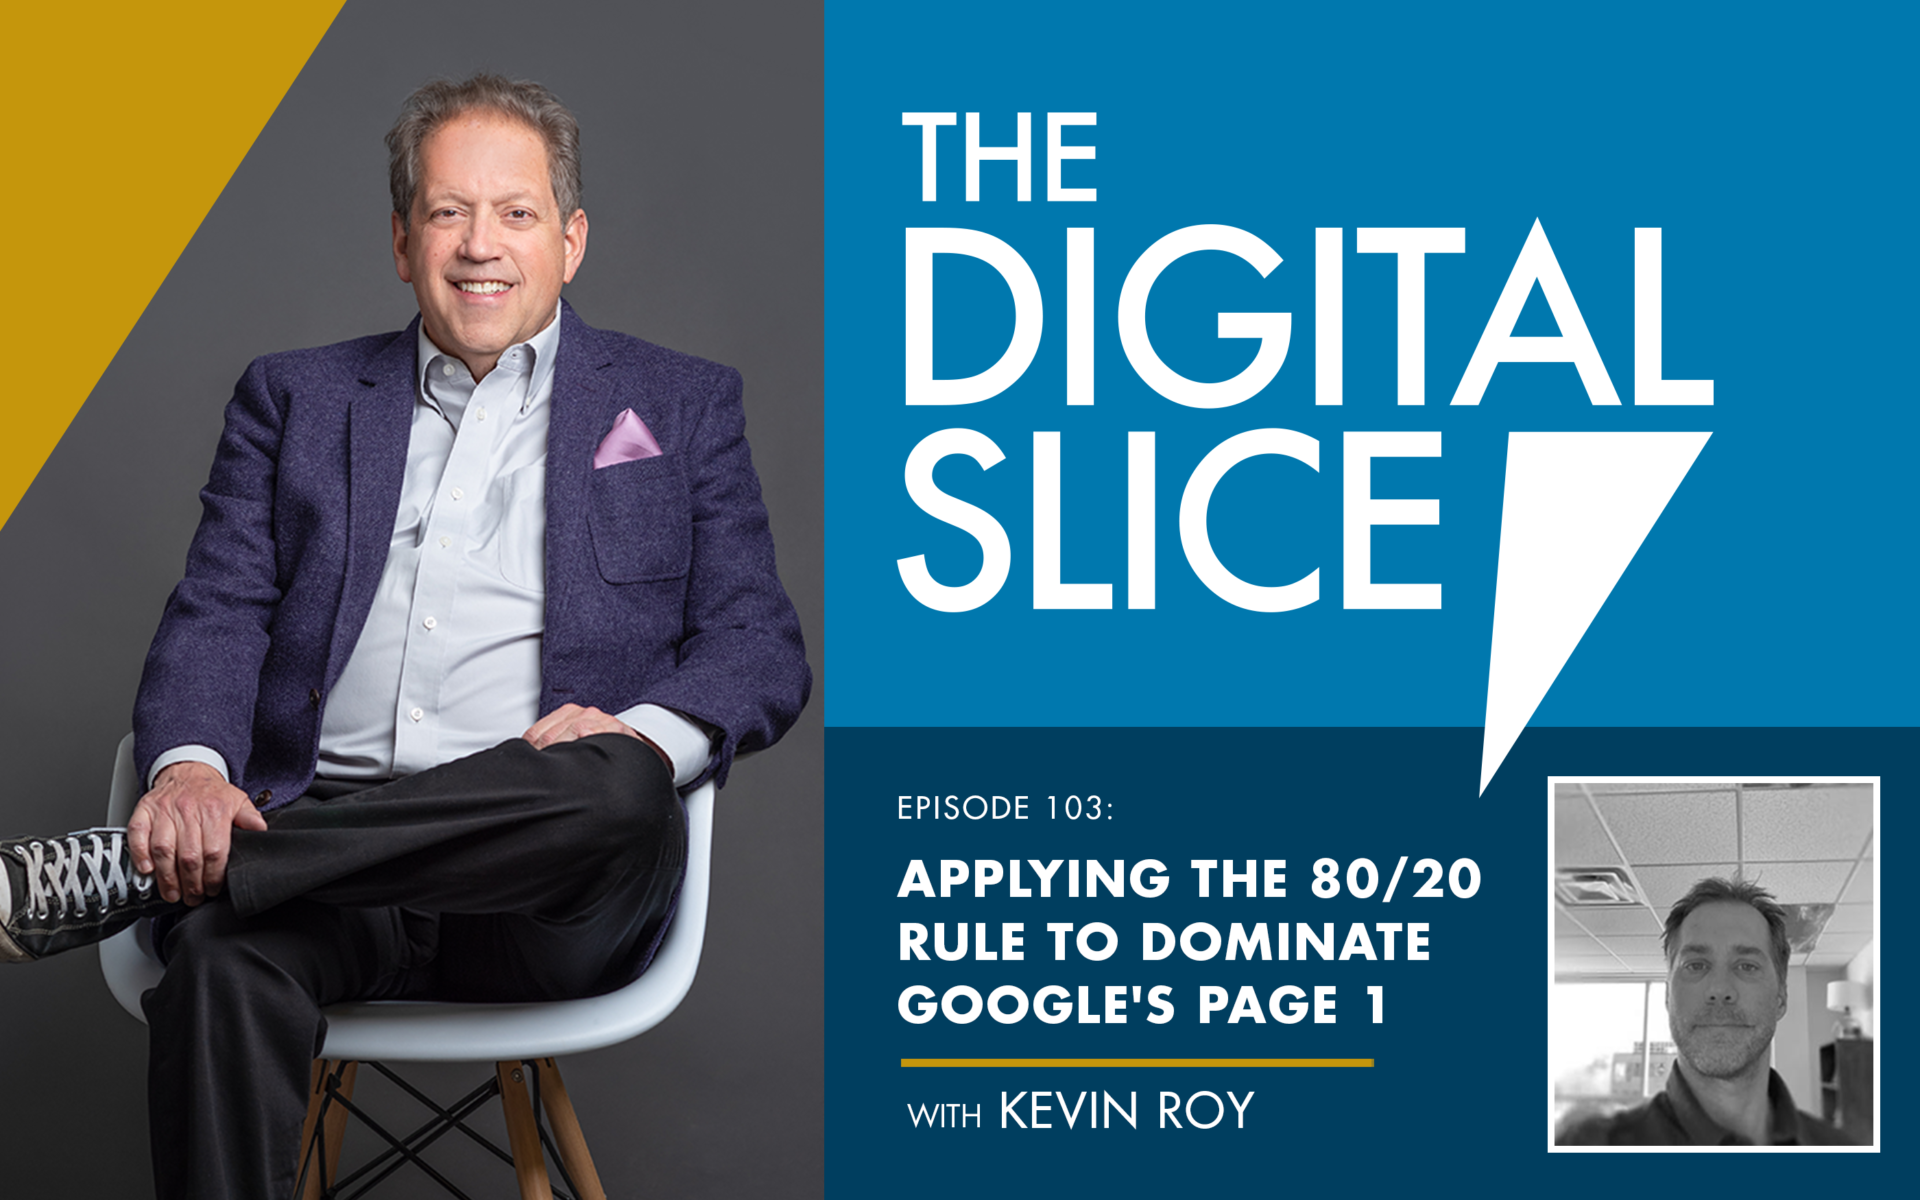 [PODCAST] Applying The 80/20 Rule To Dominate Google's Page 1